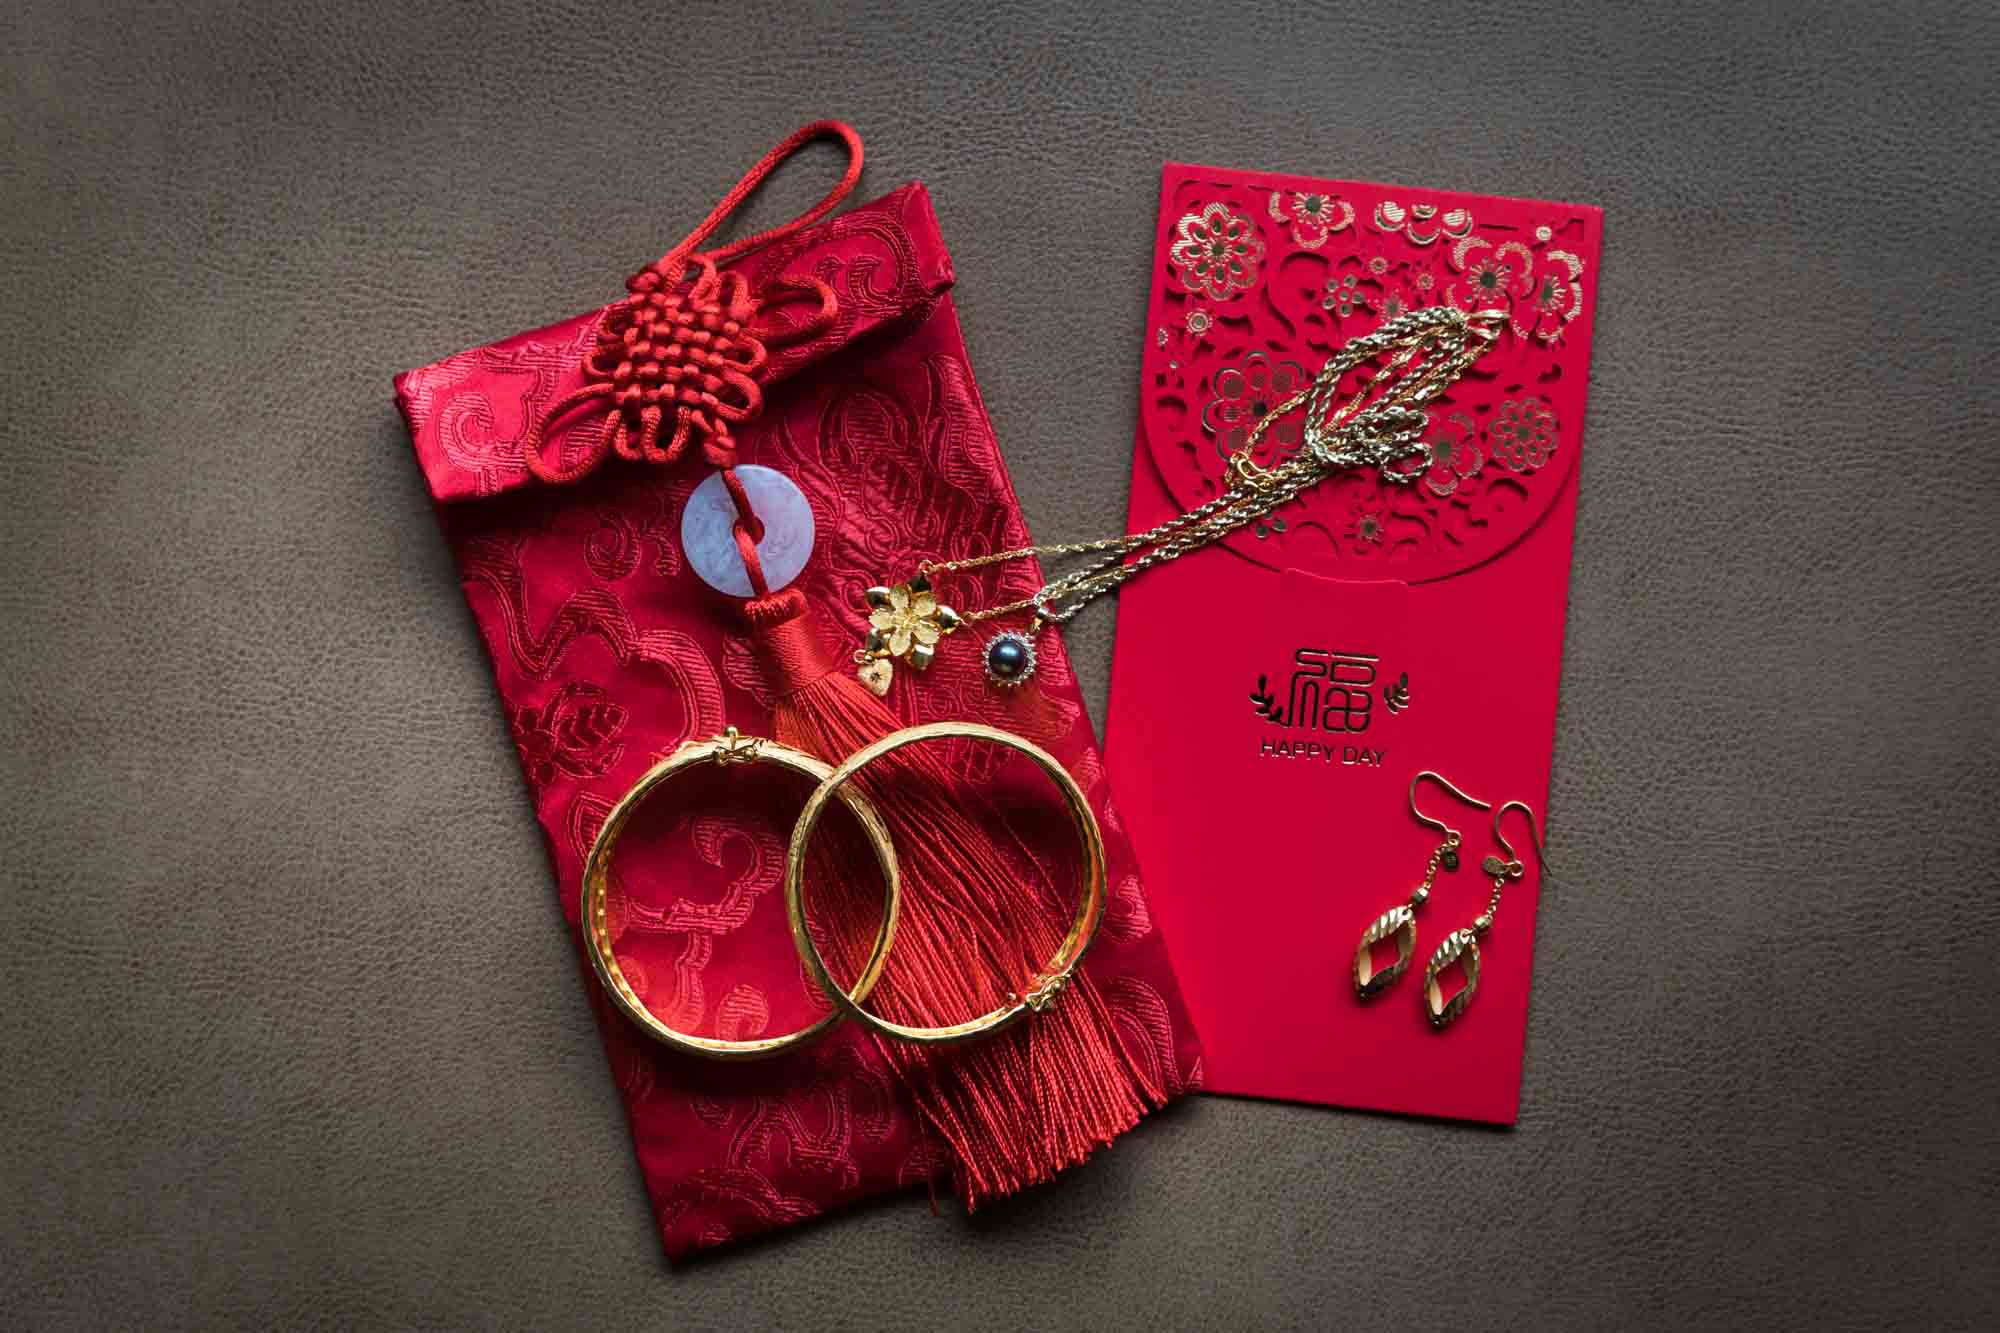 Gold jewelry on red fabric envelope with Chinese characters